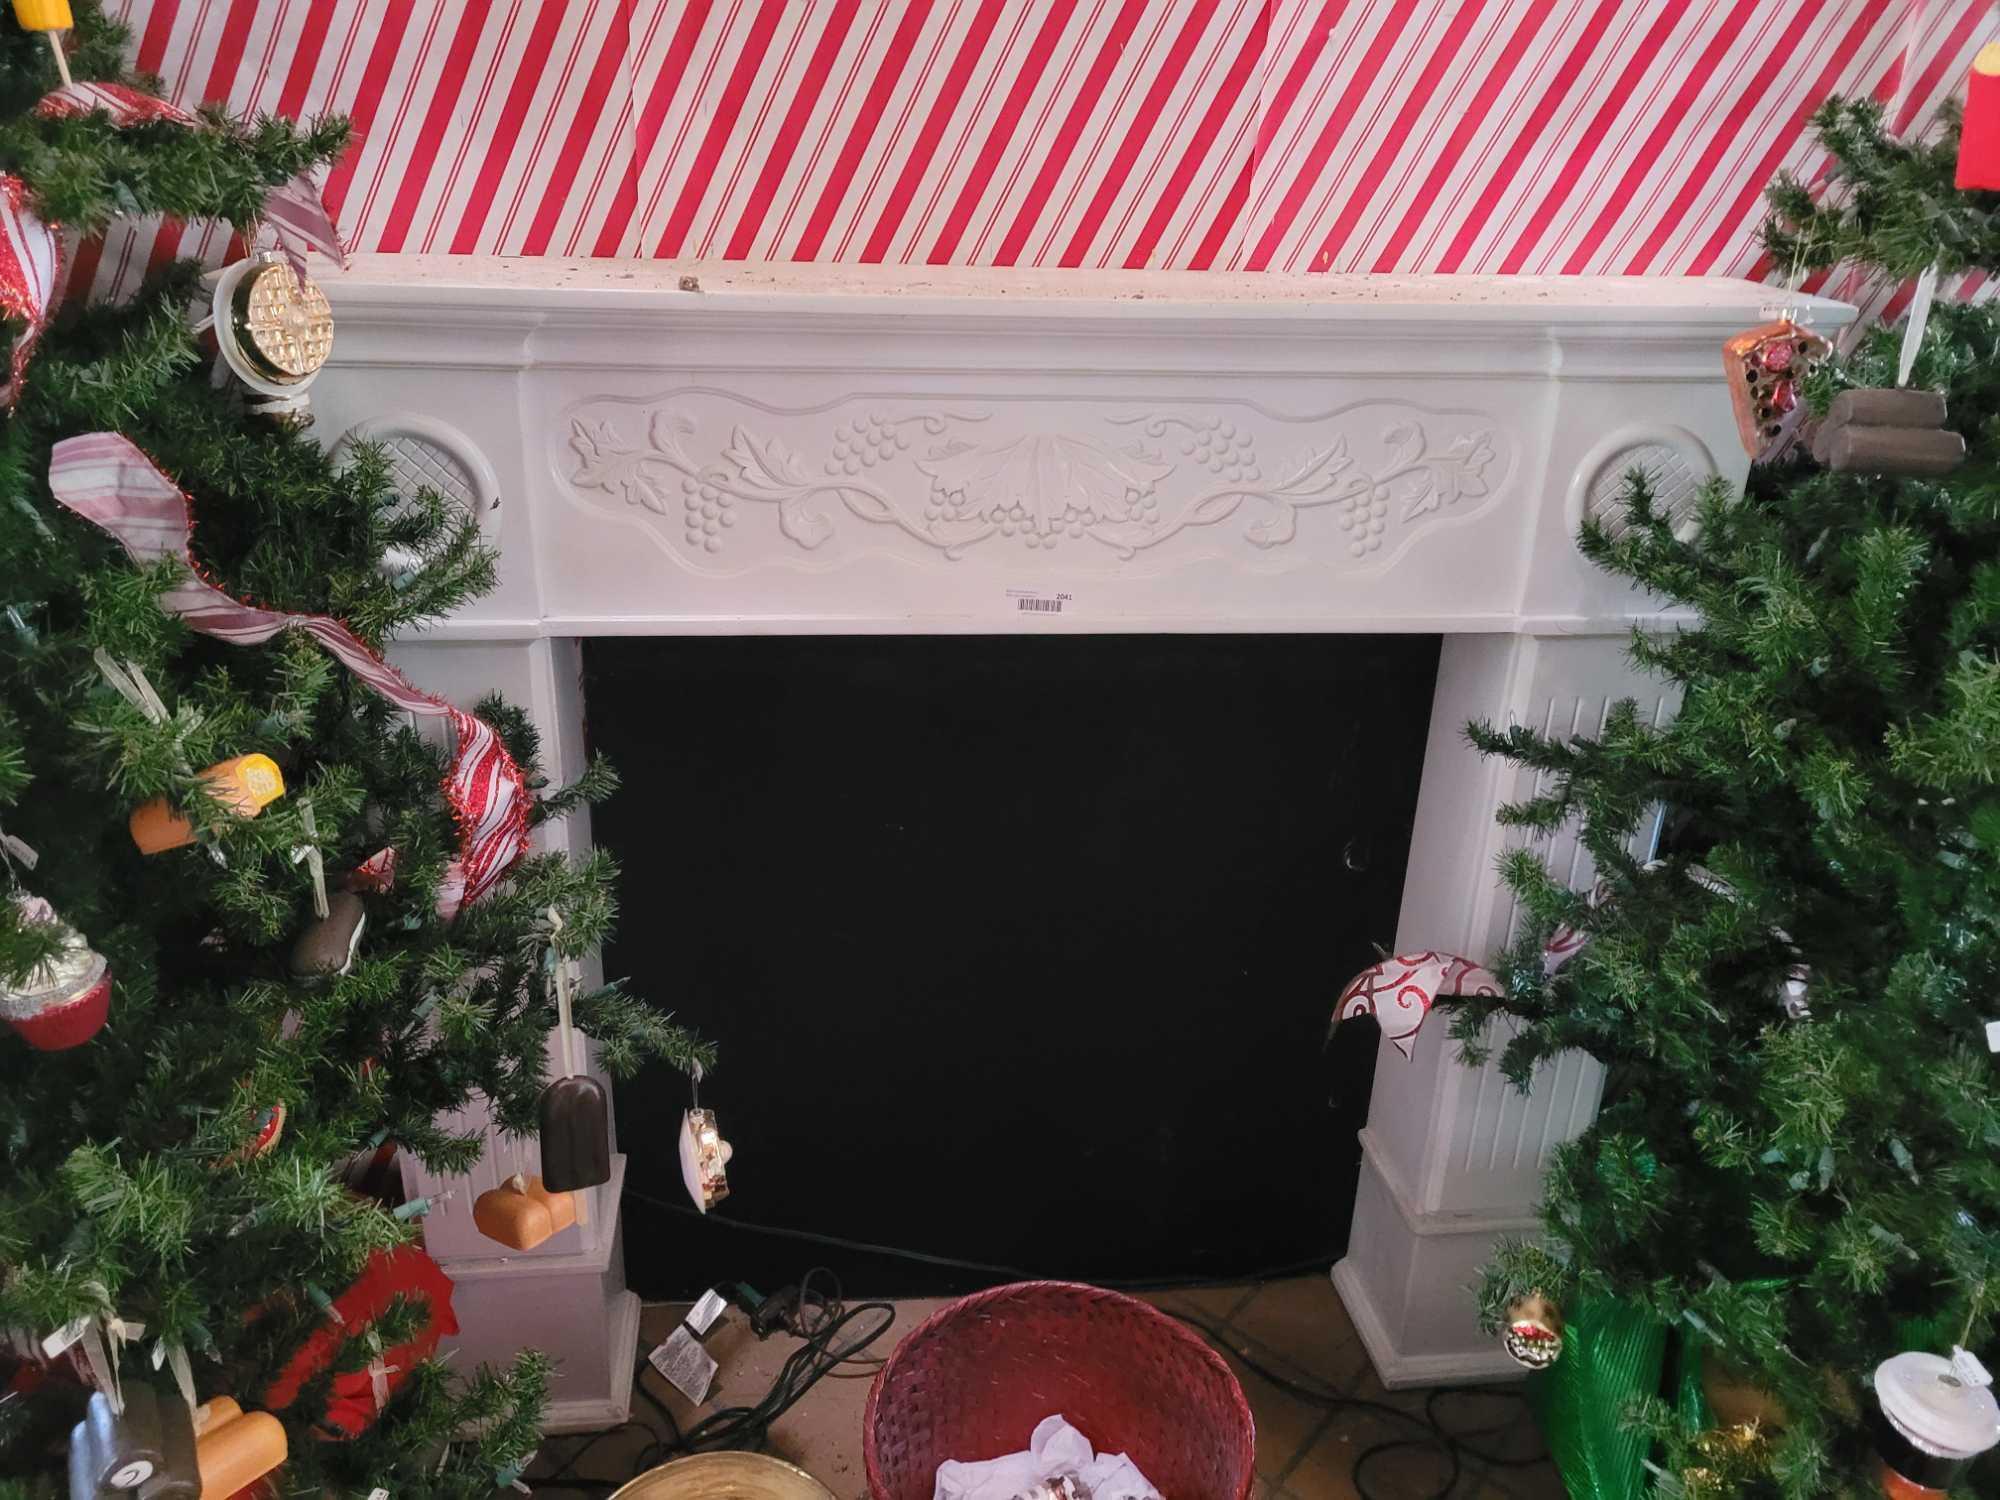 Faux Fireplace w 2 Christmas trees and Ornaments Baskets of Ornaments all included